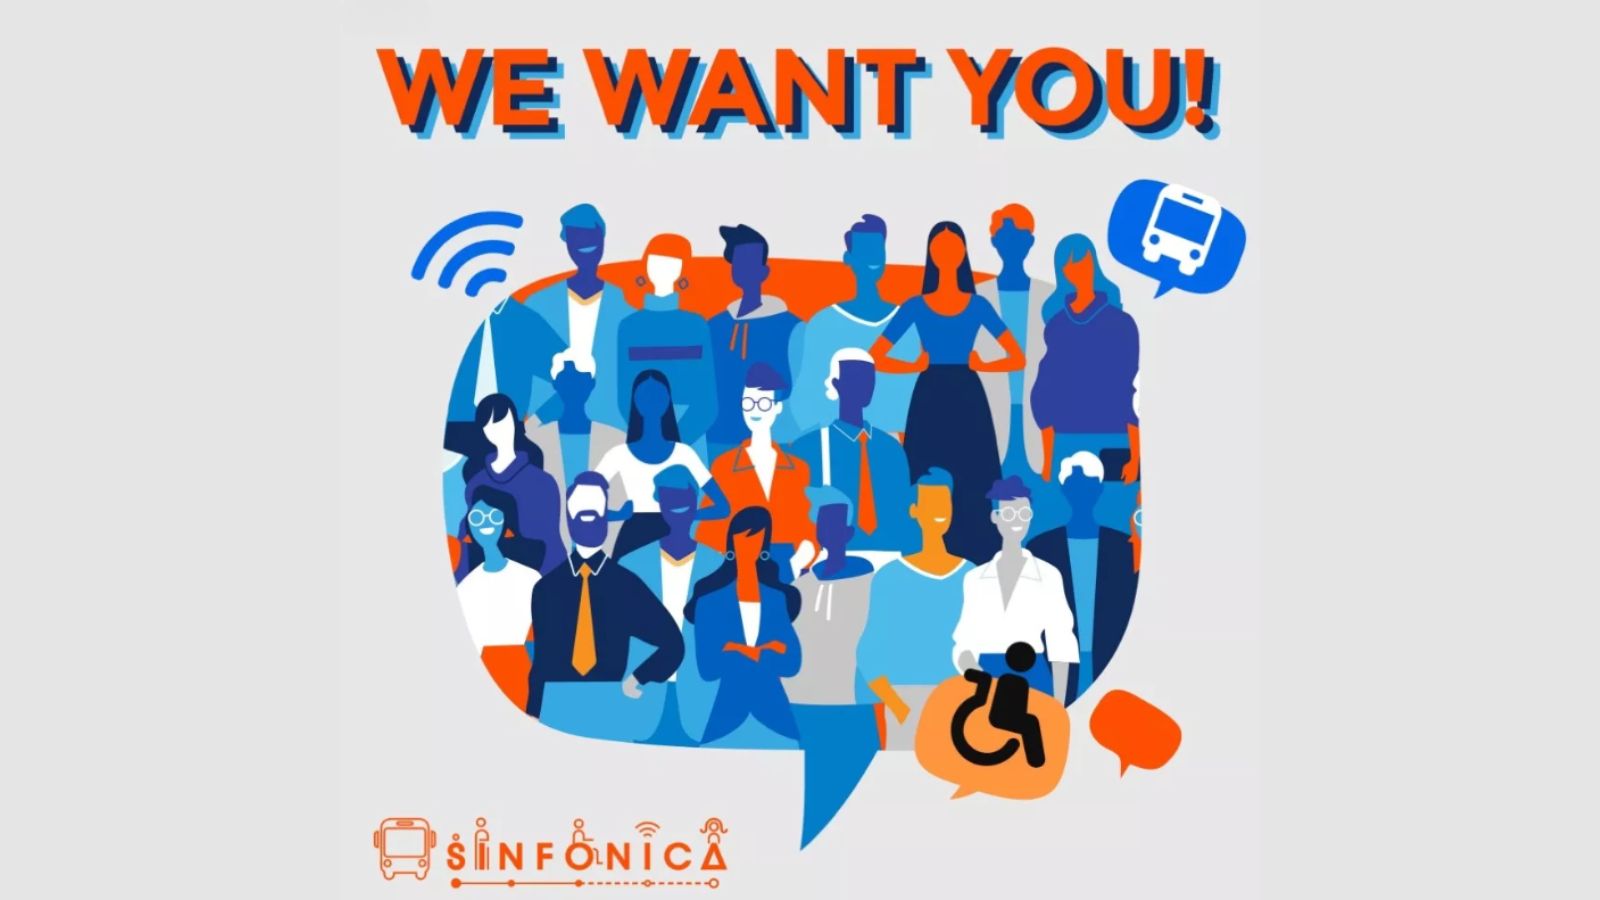 Take part in the SINFONICA survey